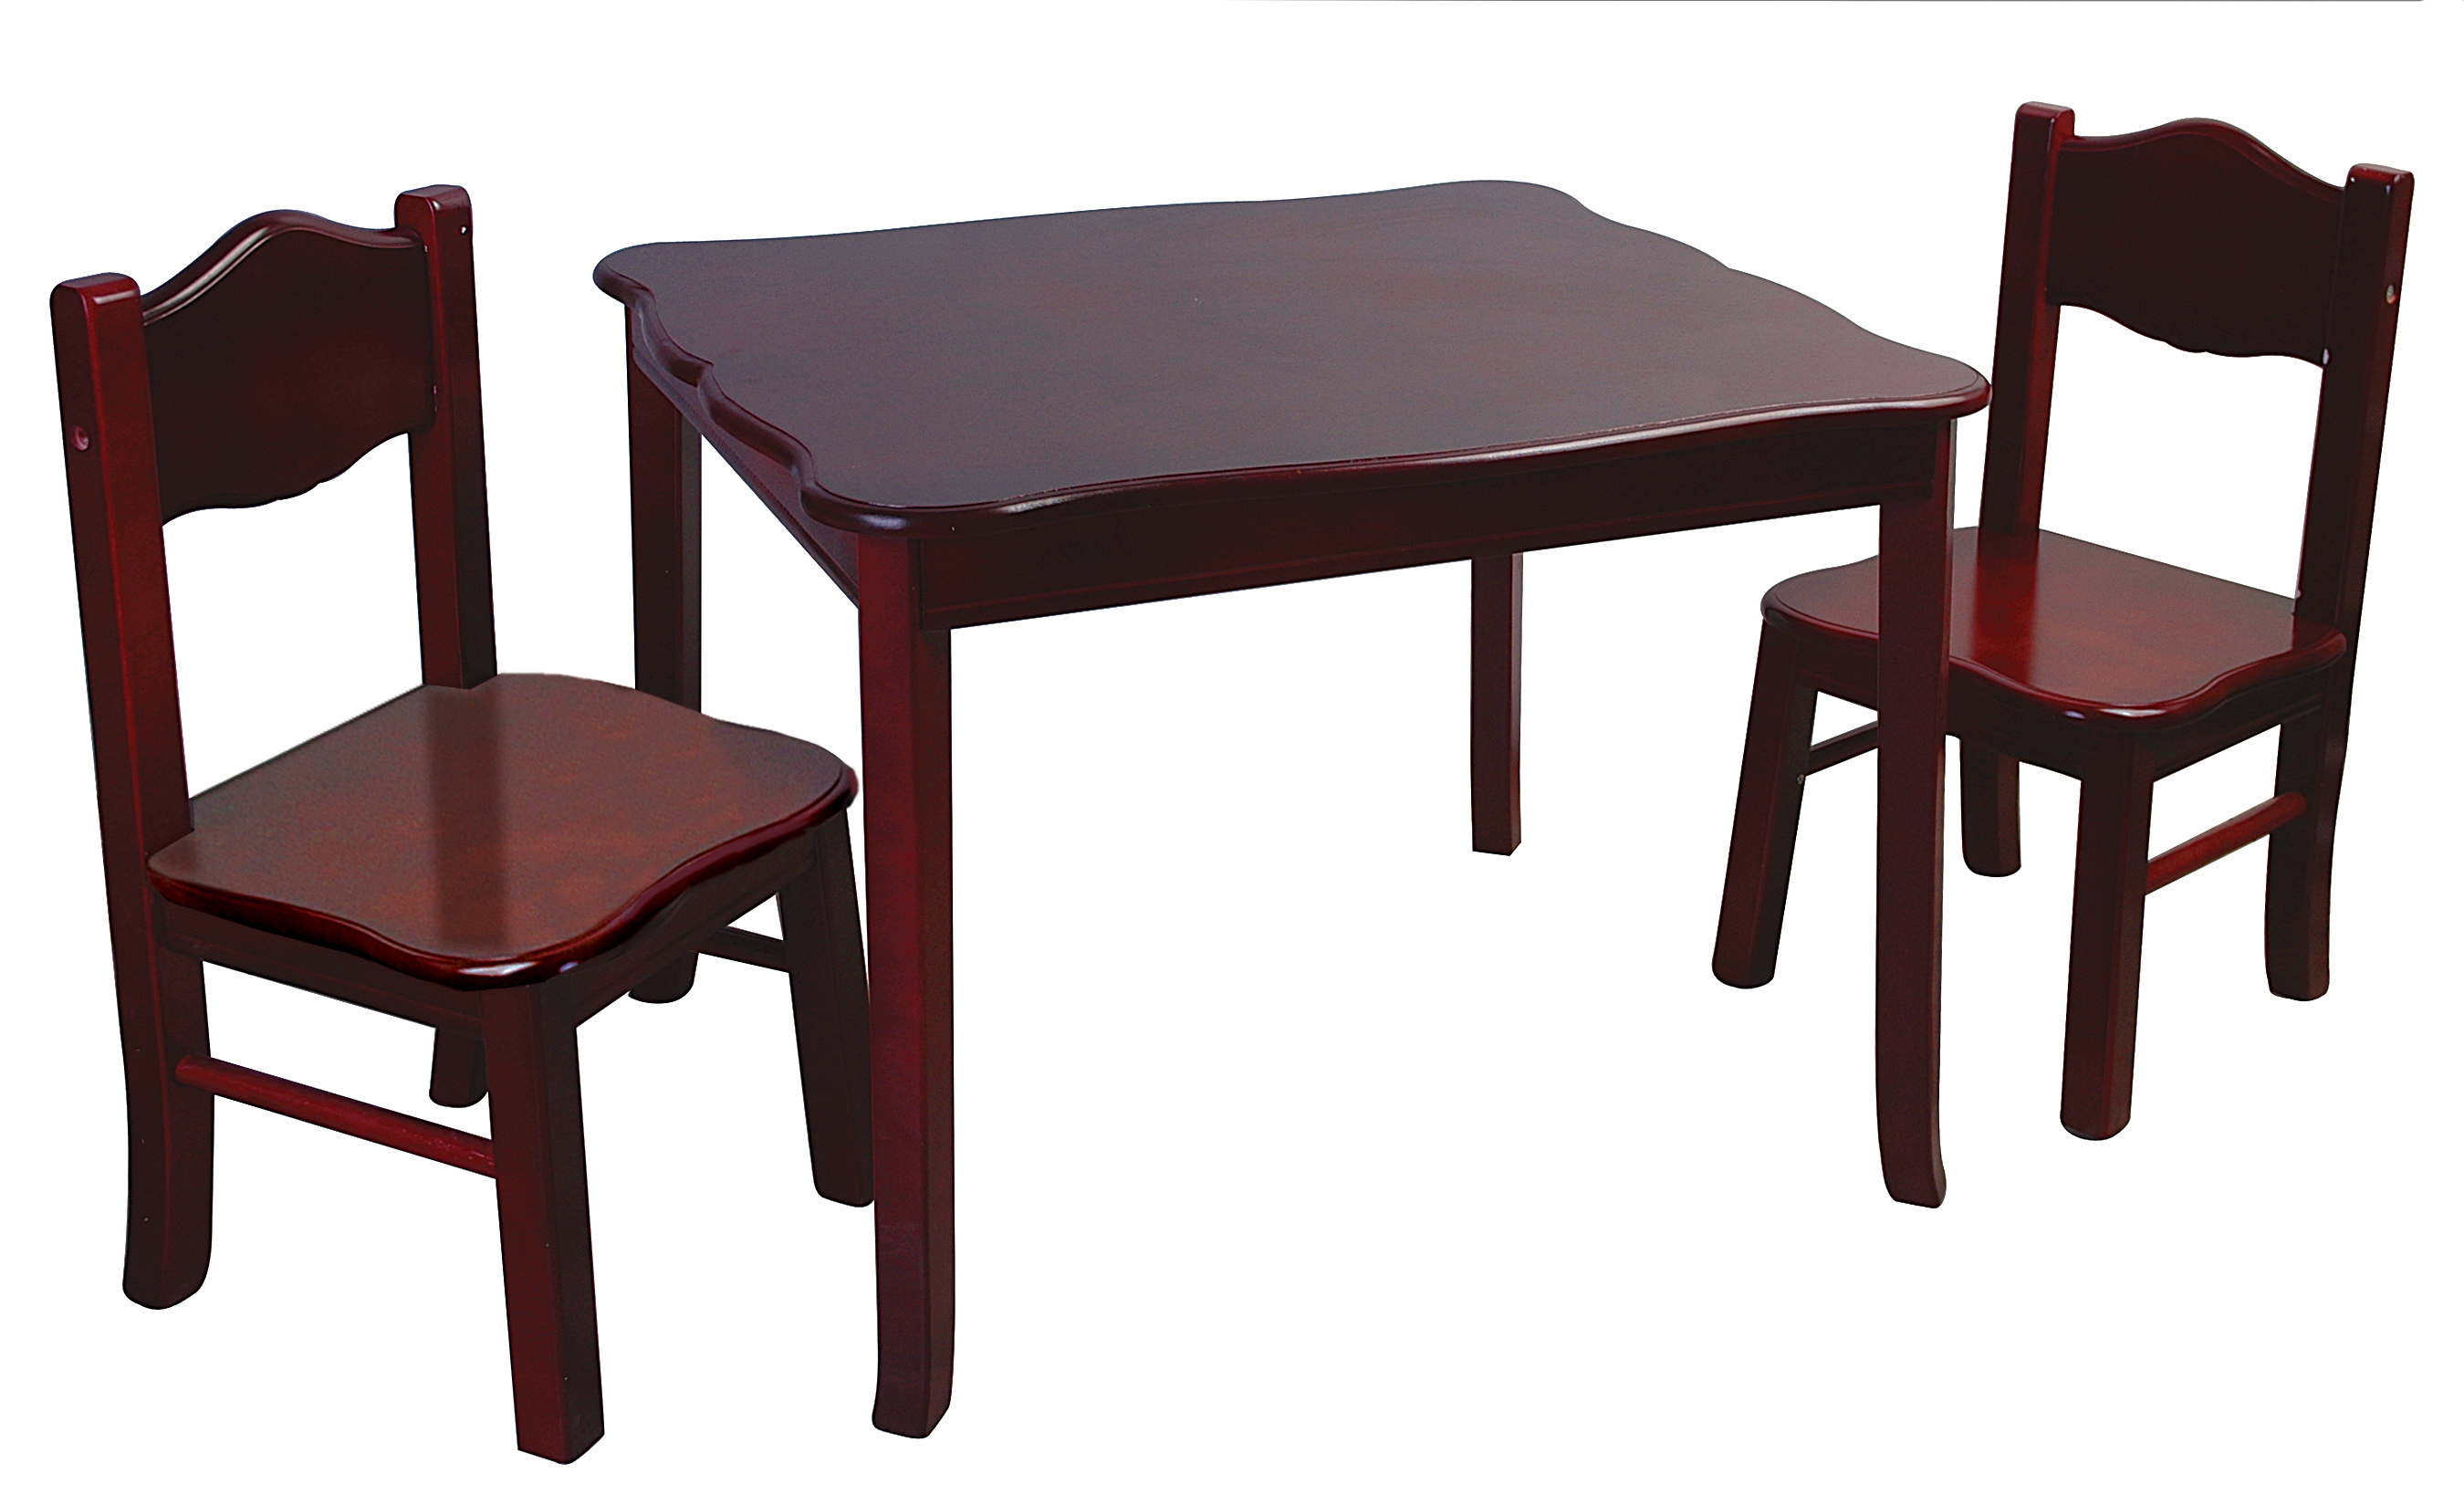 Guidecraft Classic Espresso Table and Chairs Set G86202